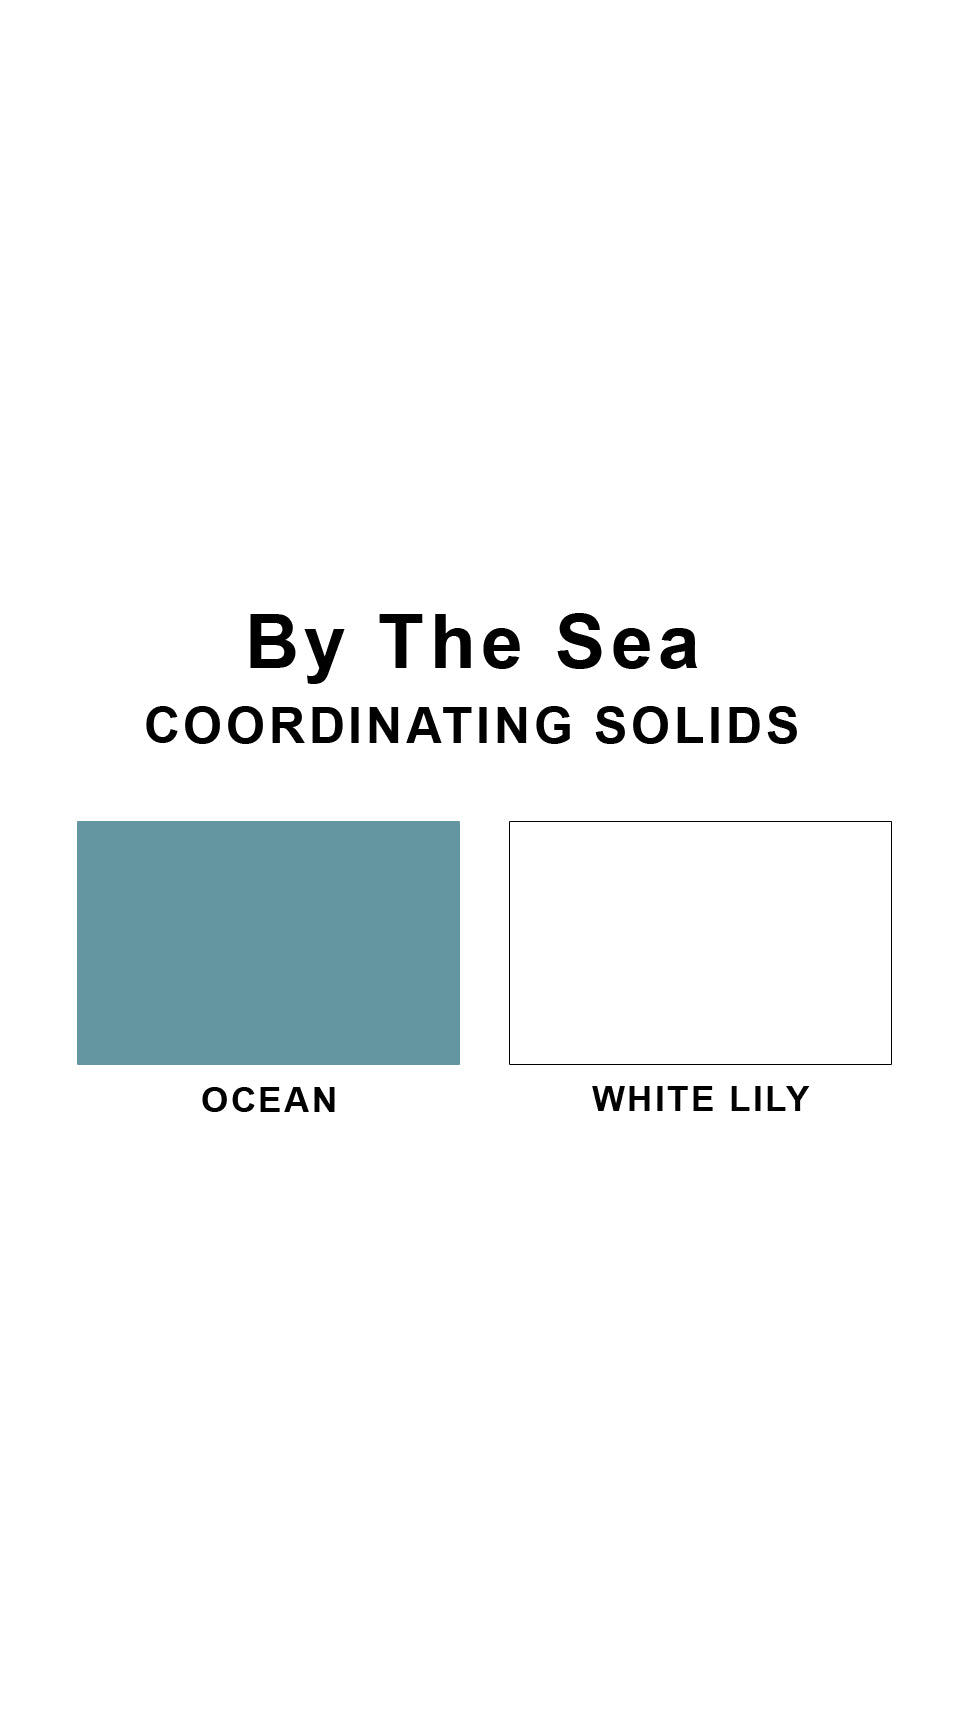 Coordinating solids chart for By the Sea swimsuit print: Ocean and White Lily